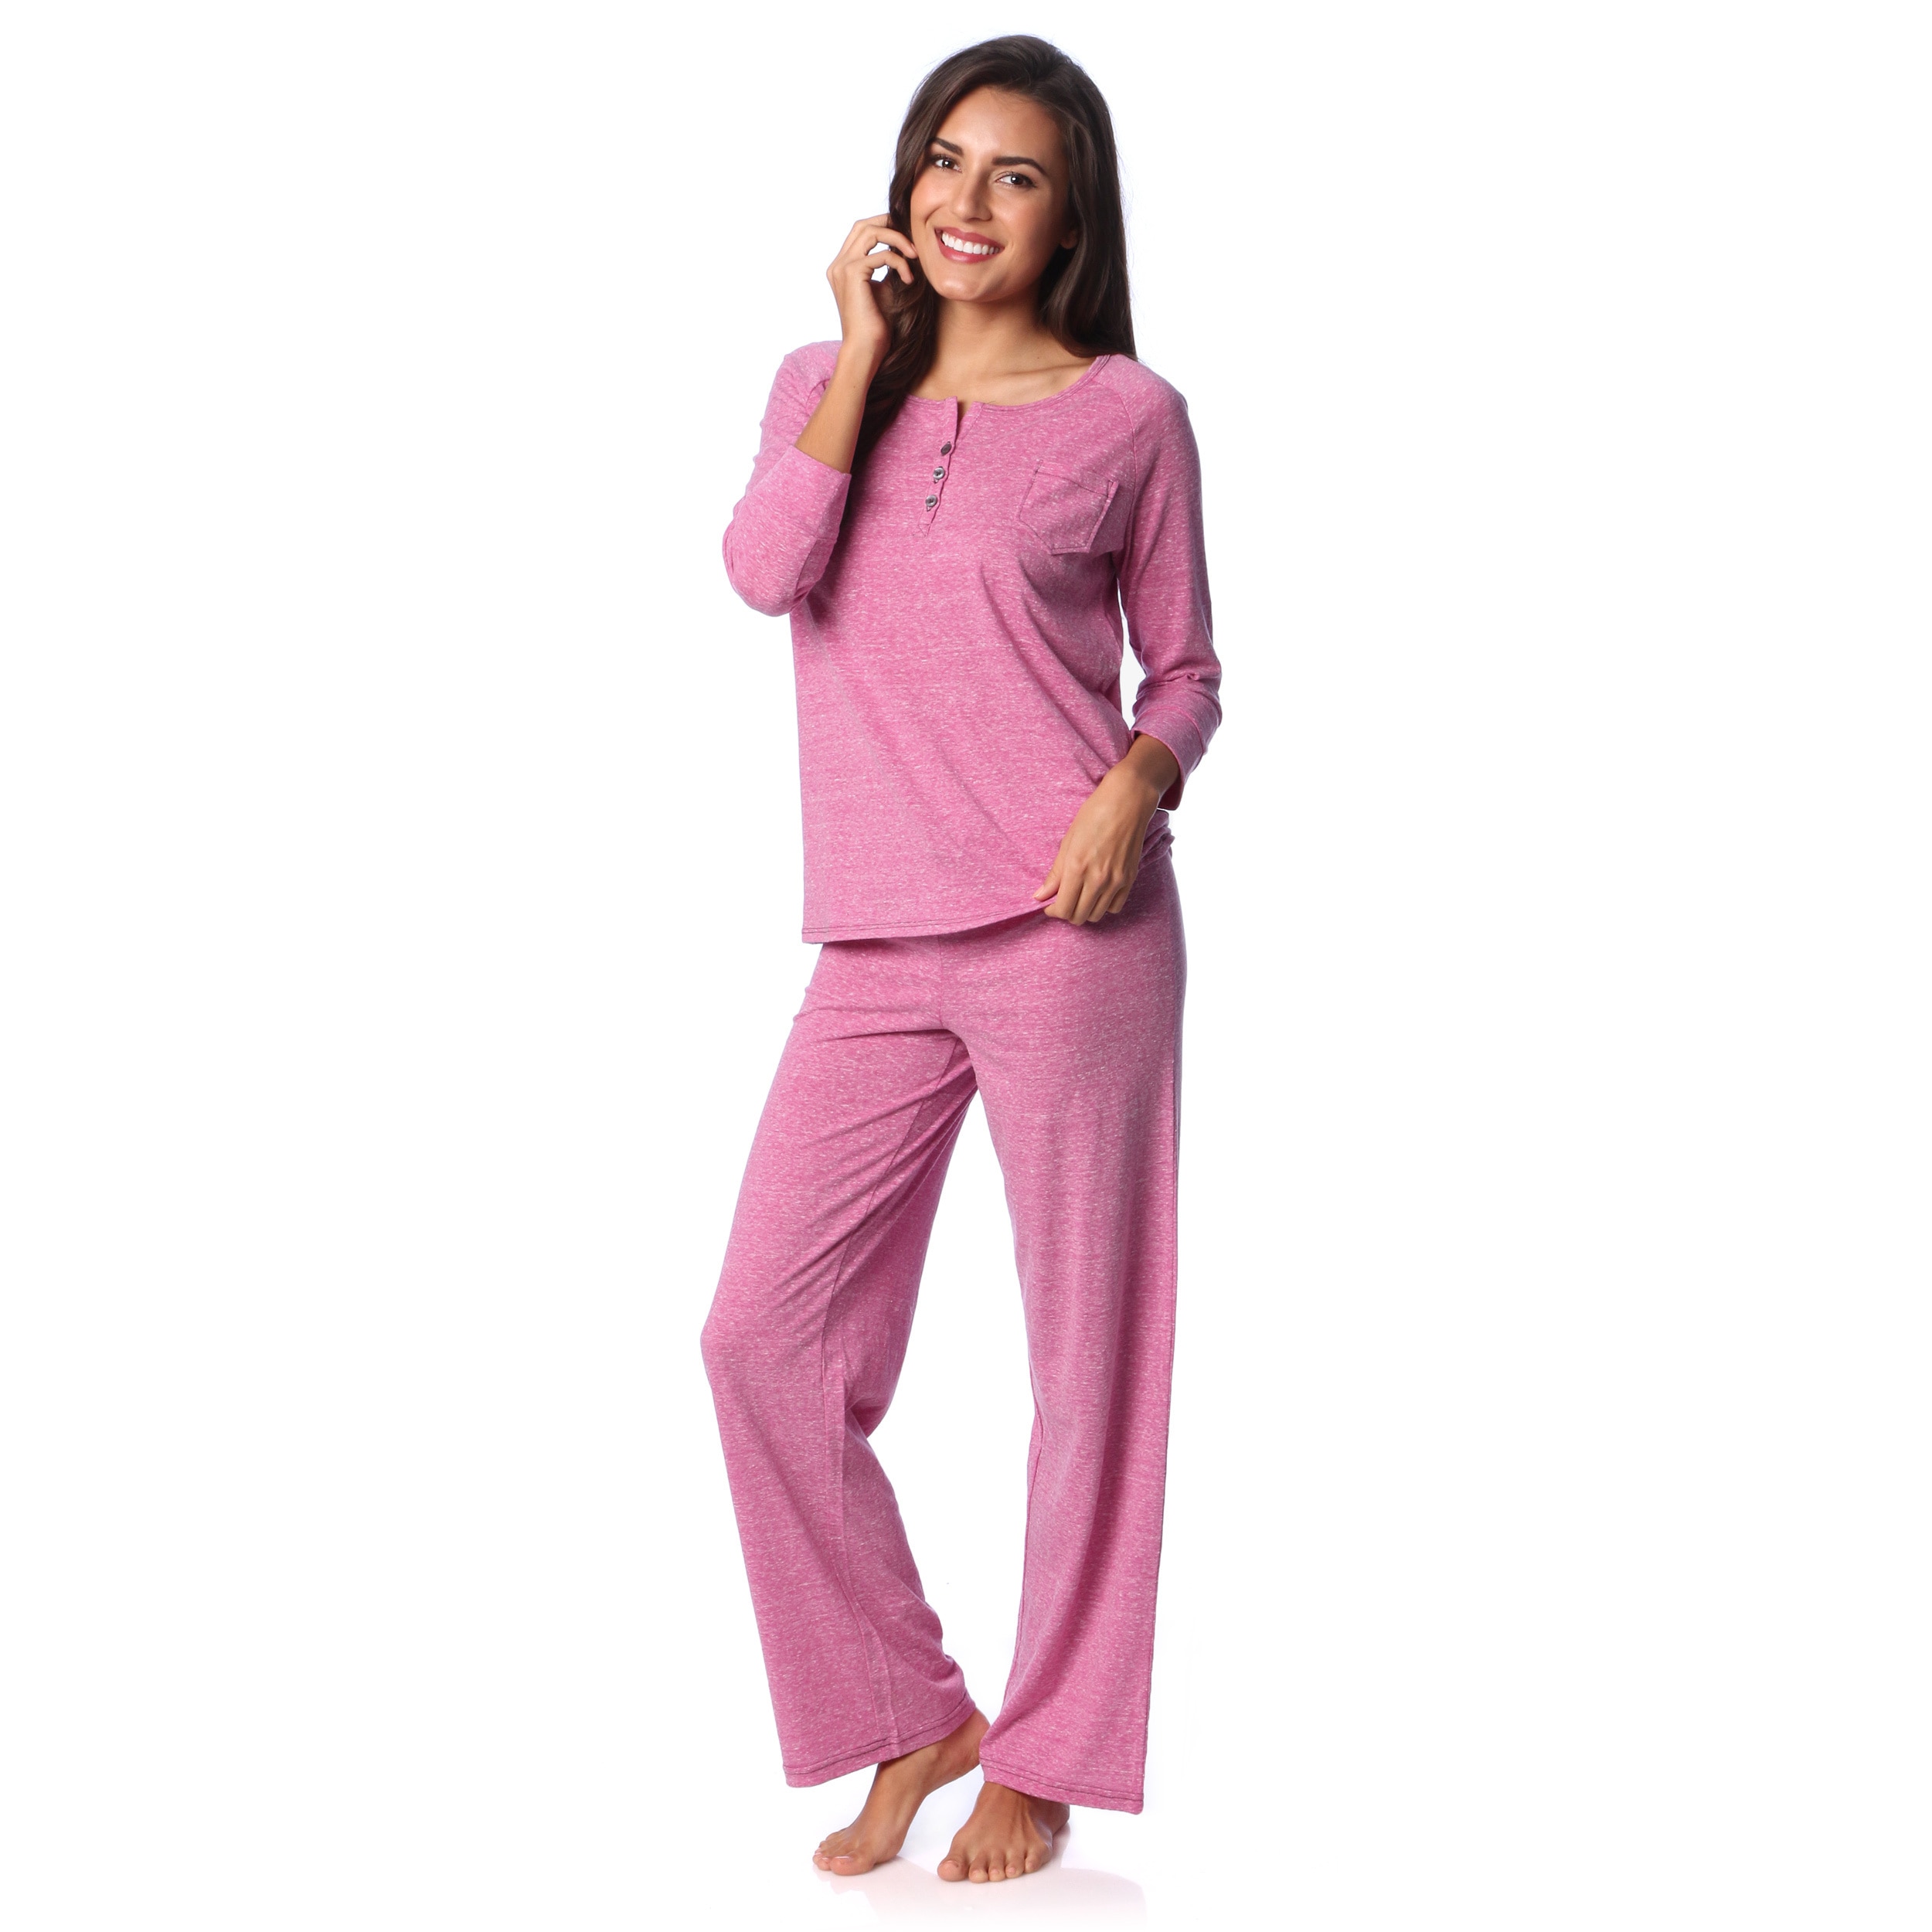 Aegean Apparel Aegean Apparel Womens Rose Marl Henley And Lounge Pant Set Pink Size S (4  6)